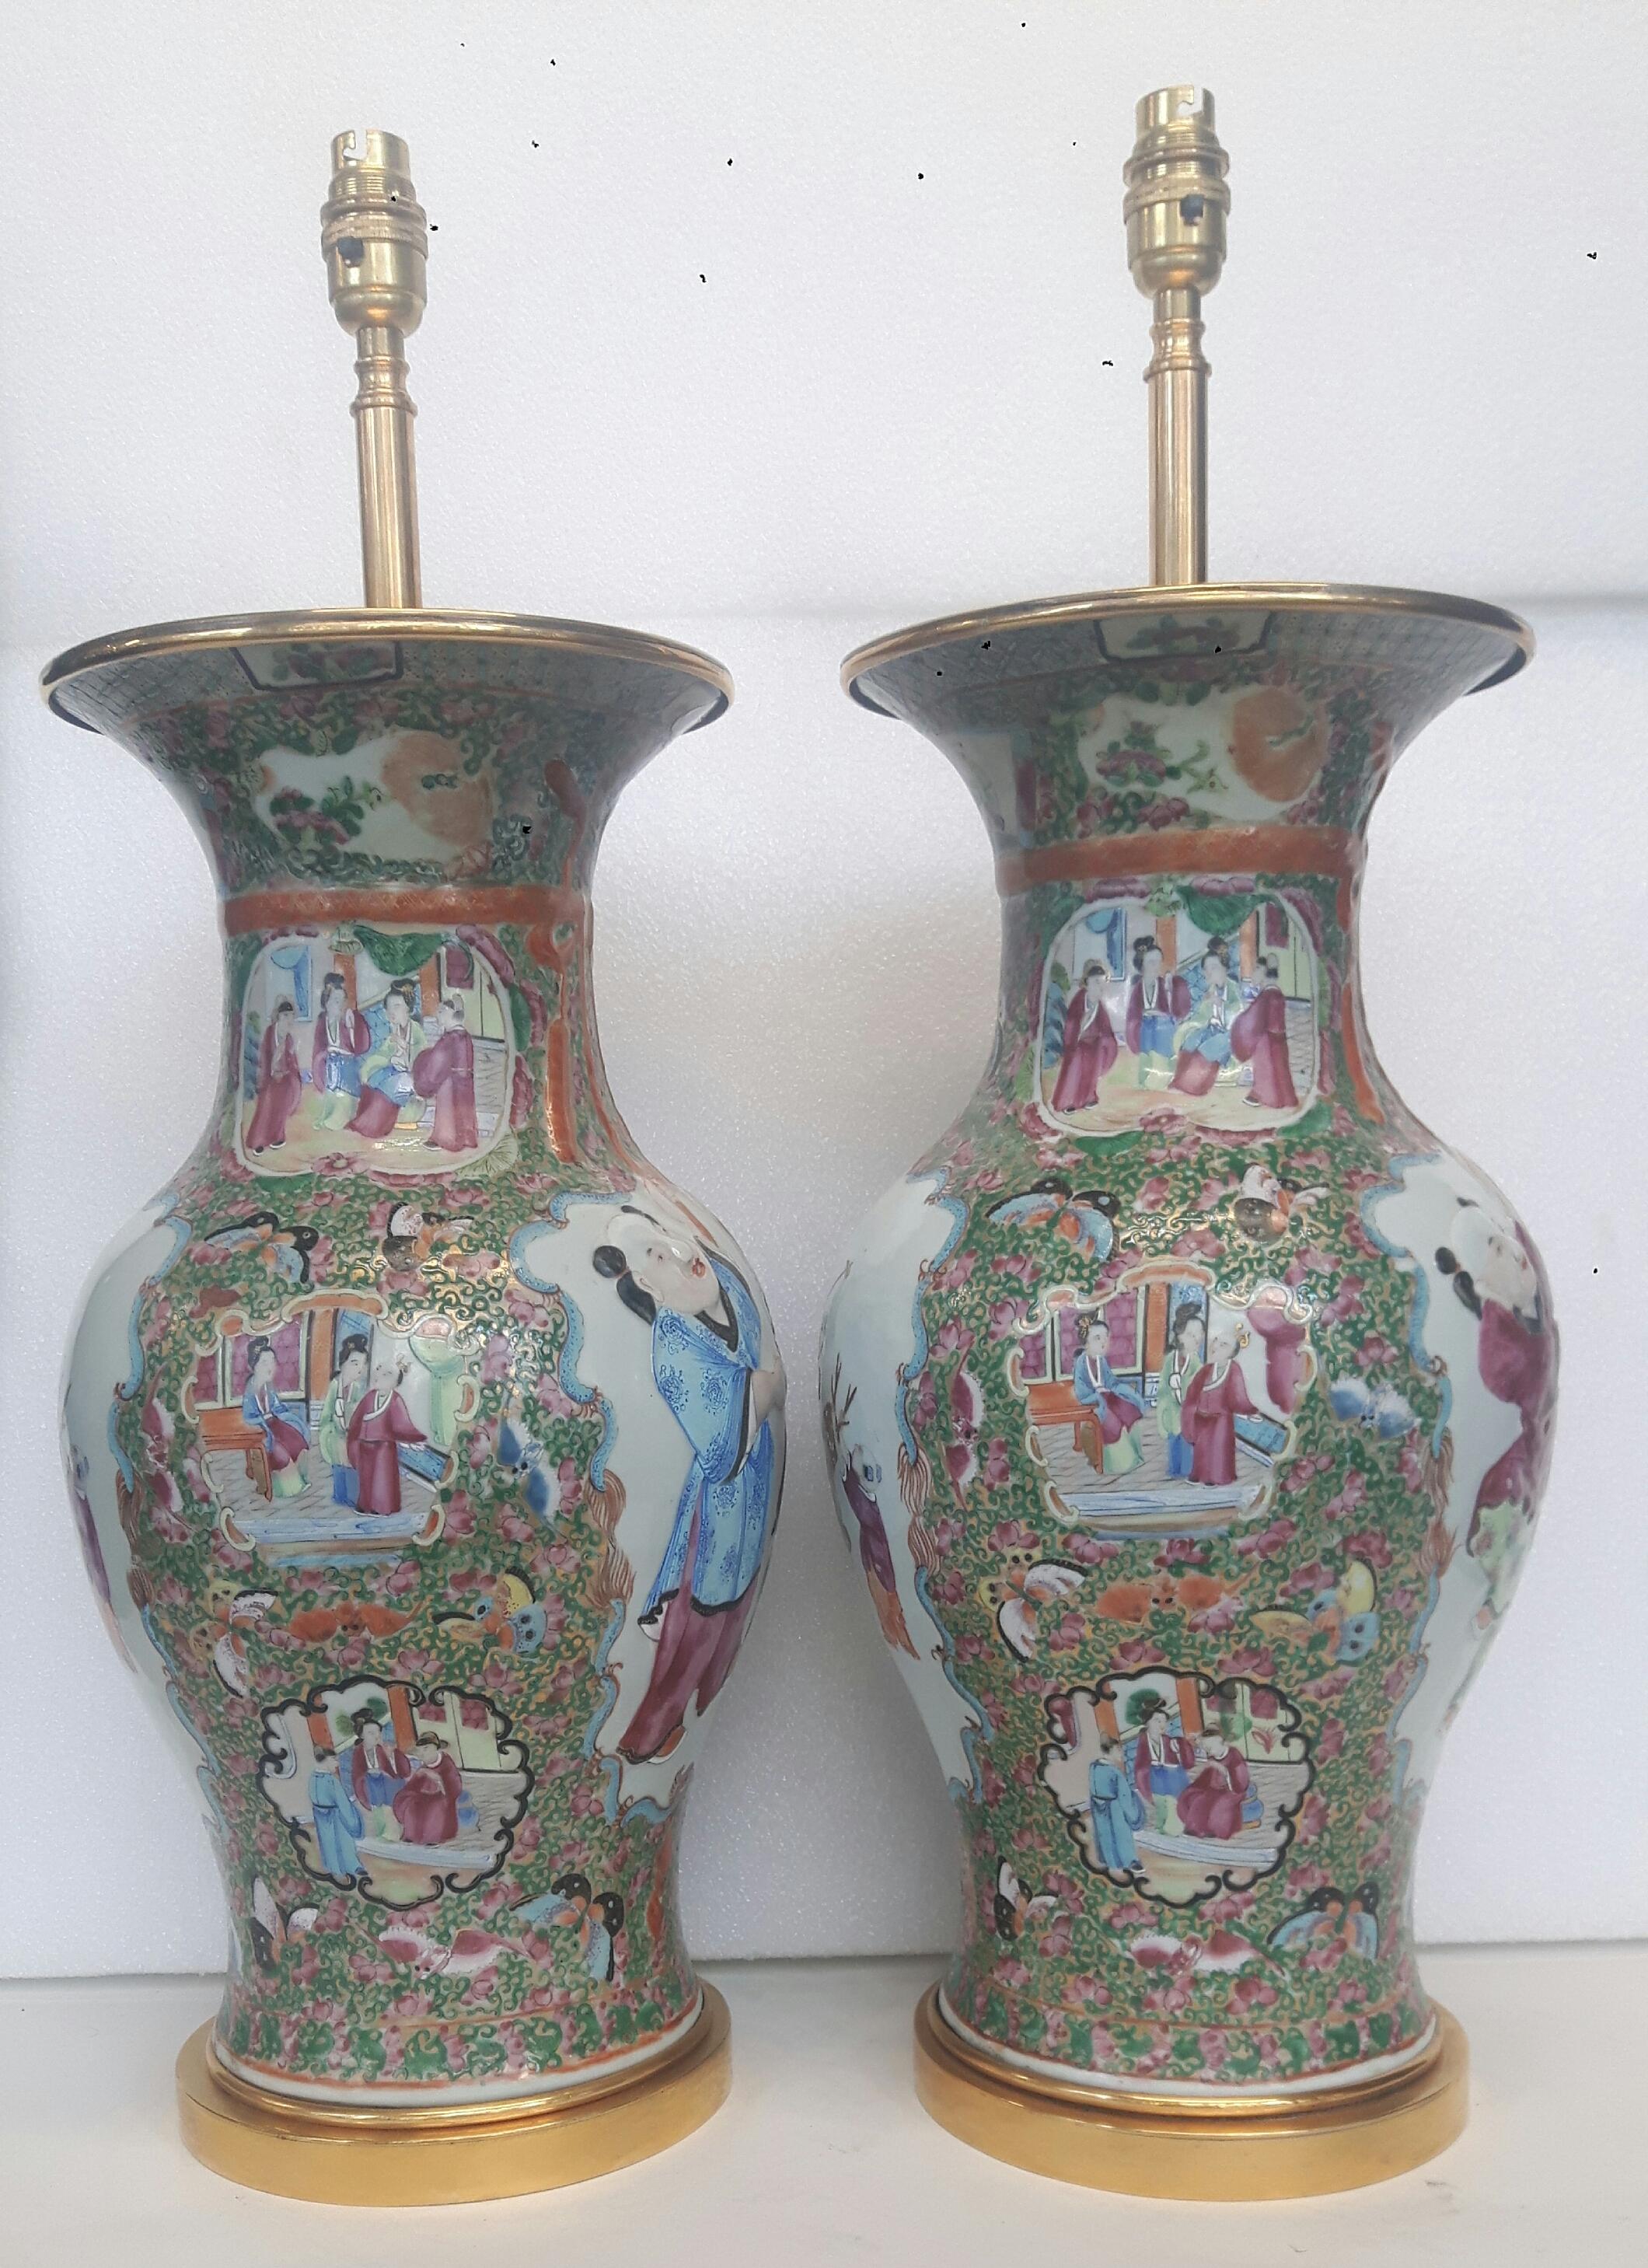 Pair of rose medallion baluster vases with vignette of Chinese hehe twins in molded relief on one side and on the other depicting ladies and a deer. Converted to lamps. Including lamp fittings, vases are 61cm, excluding lamp fittings, they are 45cm.